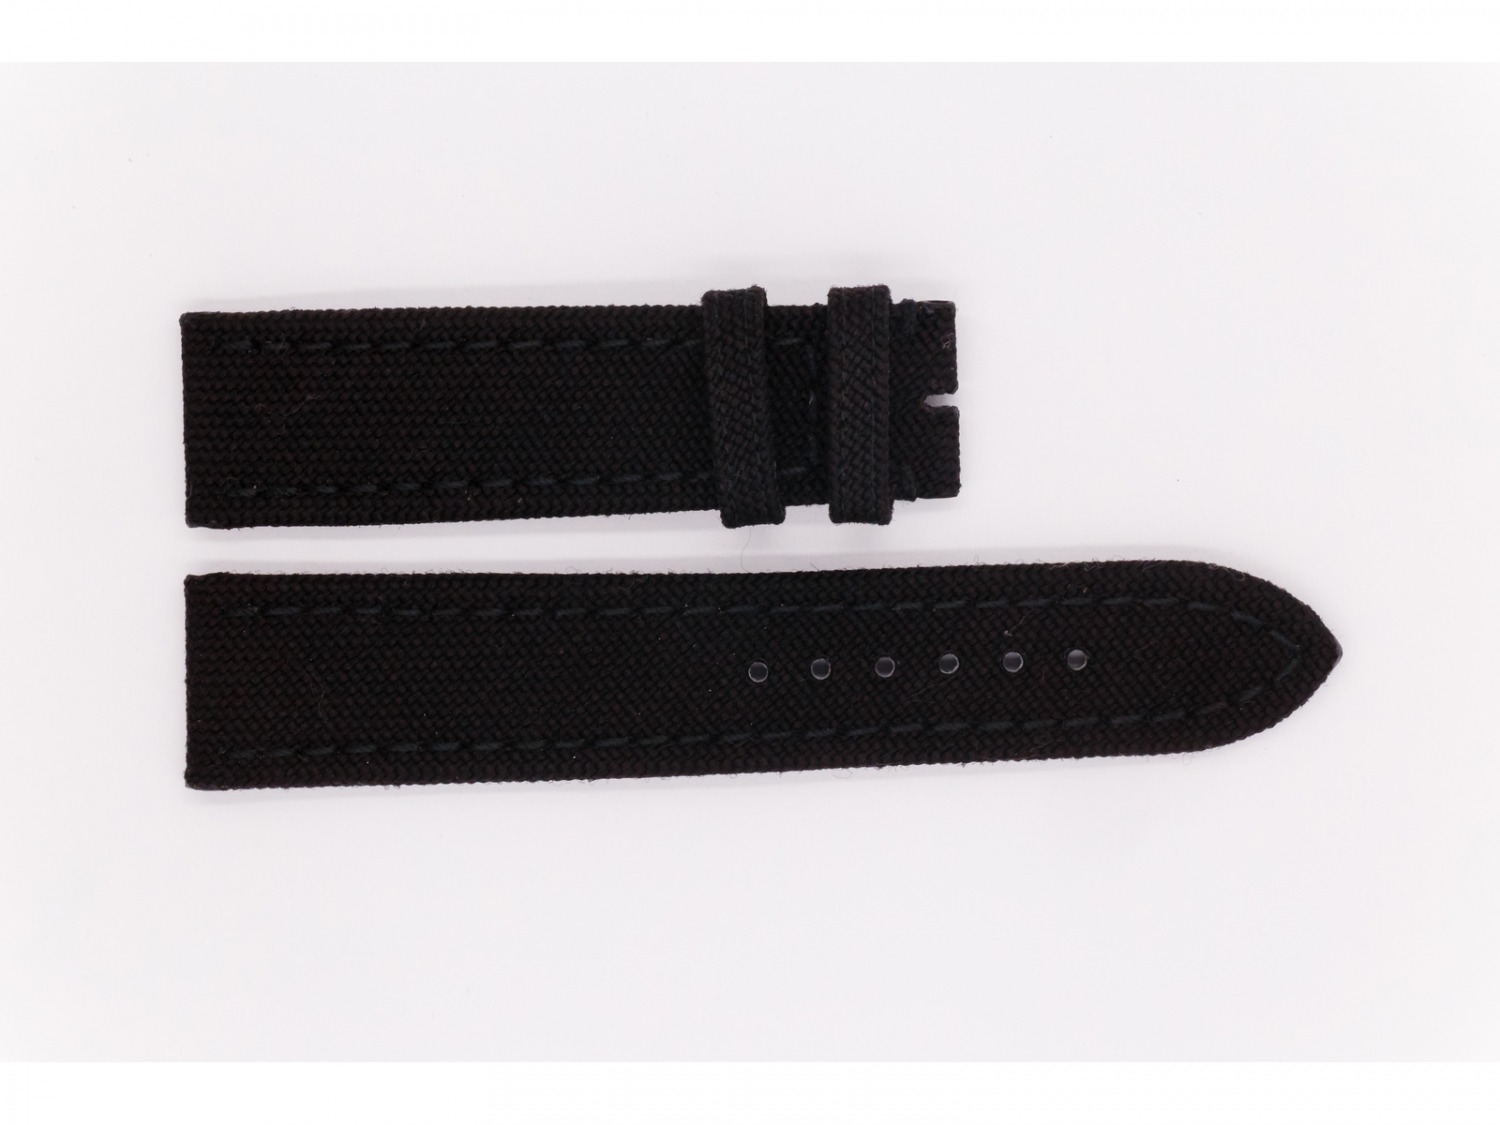 Fabric and Leather Breitling Strap, black